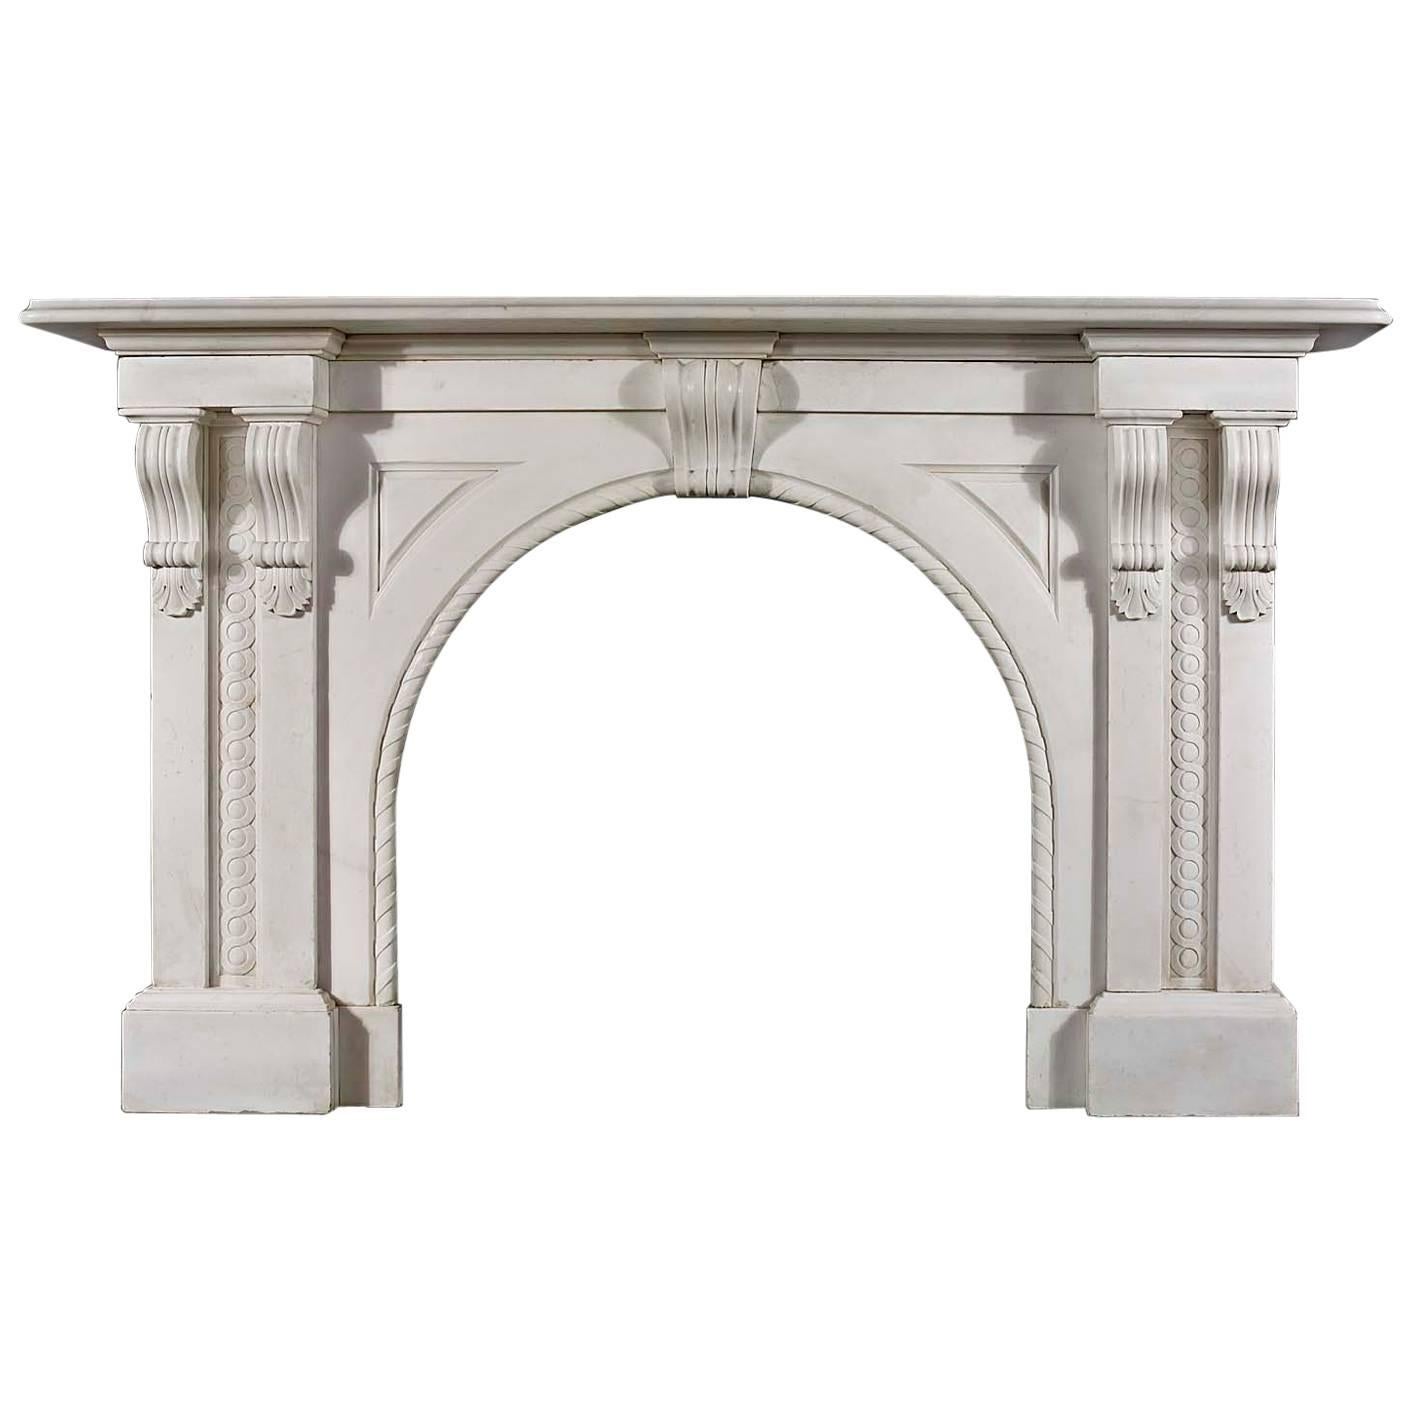 Antique Italian White Marble Victorian Arched Fireplace Mantel For Sale